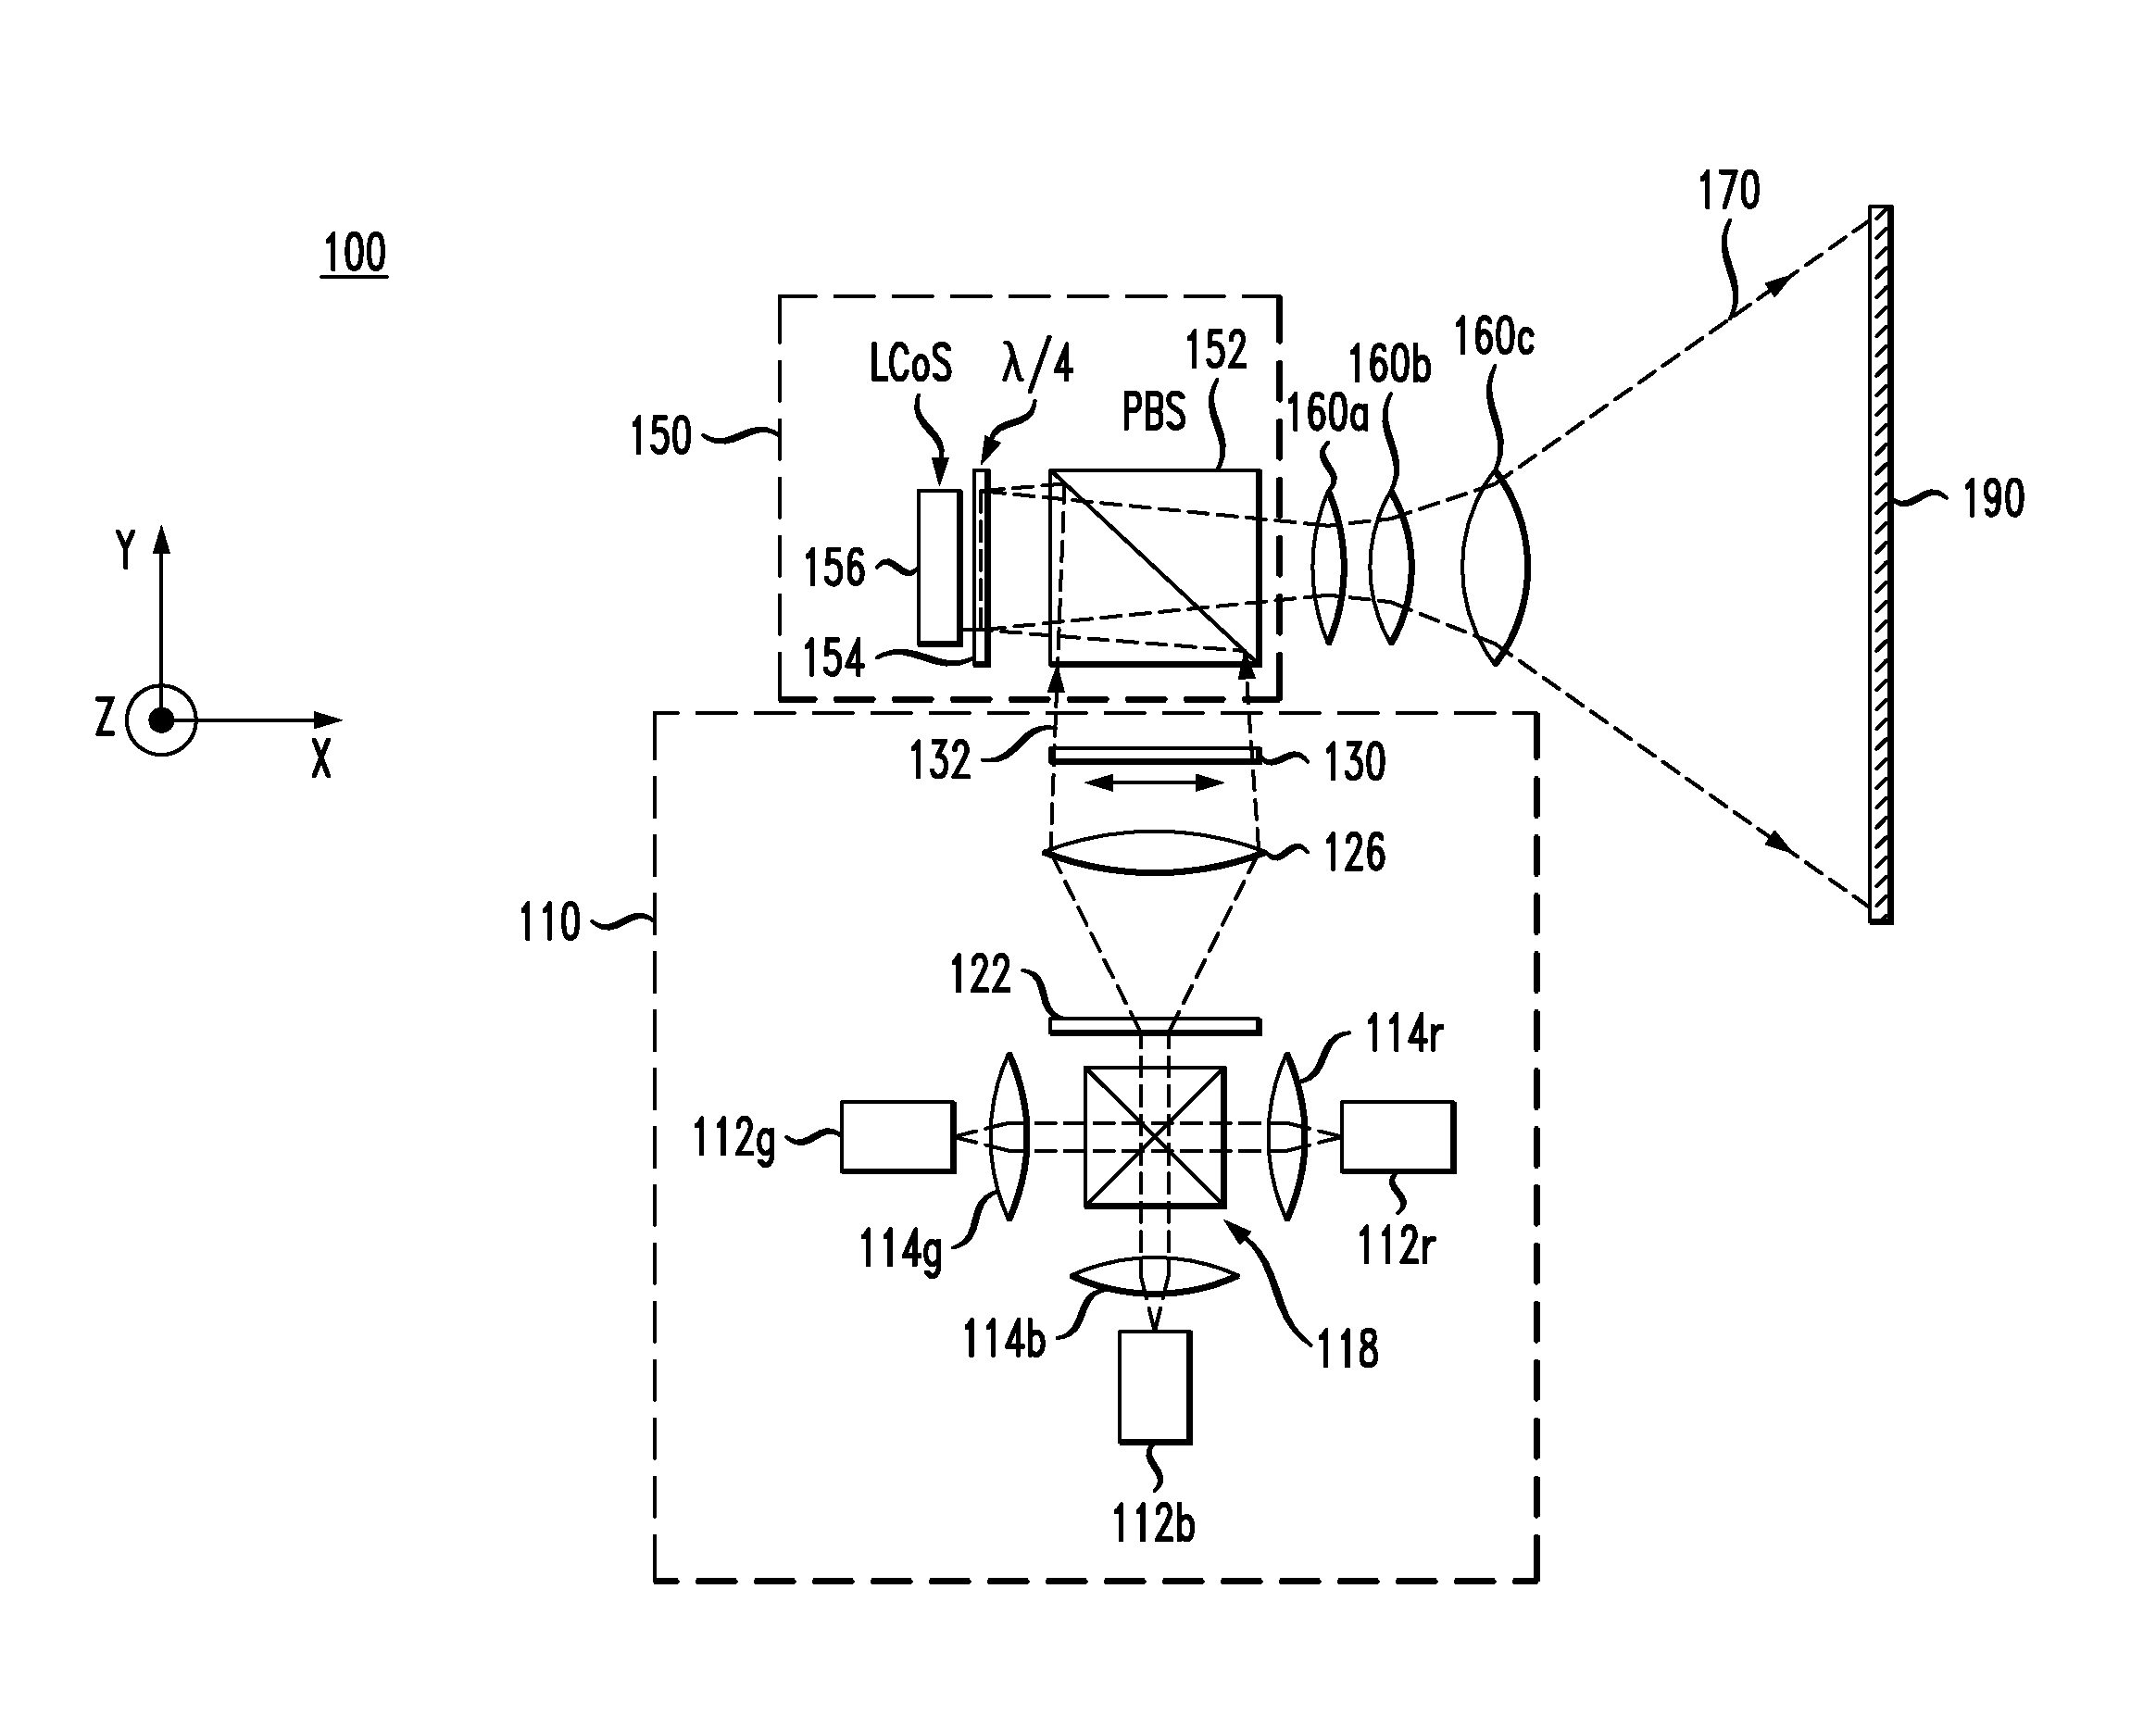 Image projector employing a speckle-reducing laser source